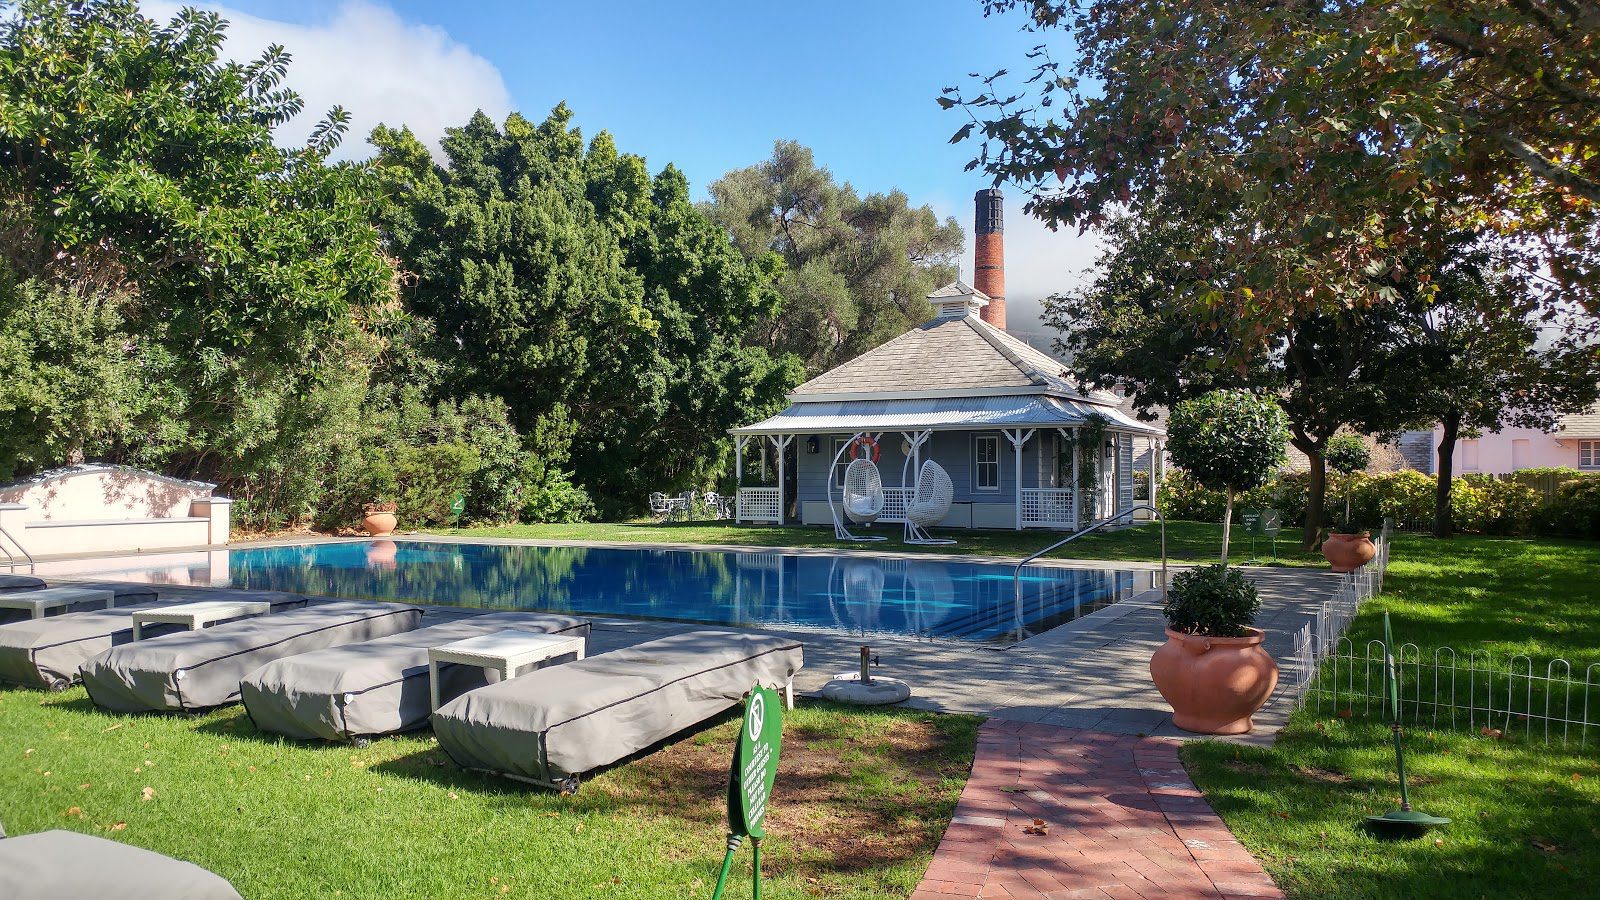 Our 5 Favorite Ways for You to Experience the Overberg, Pool Area